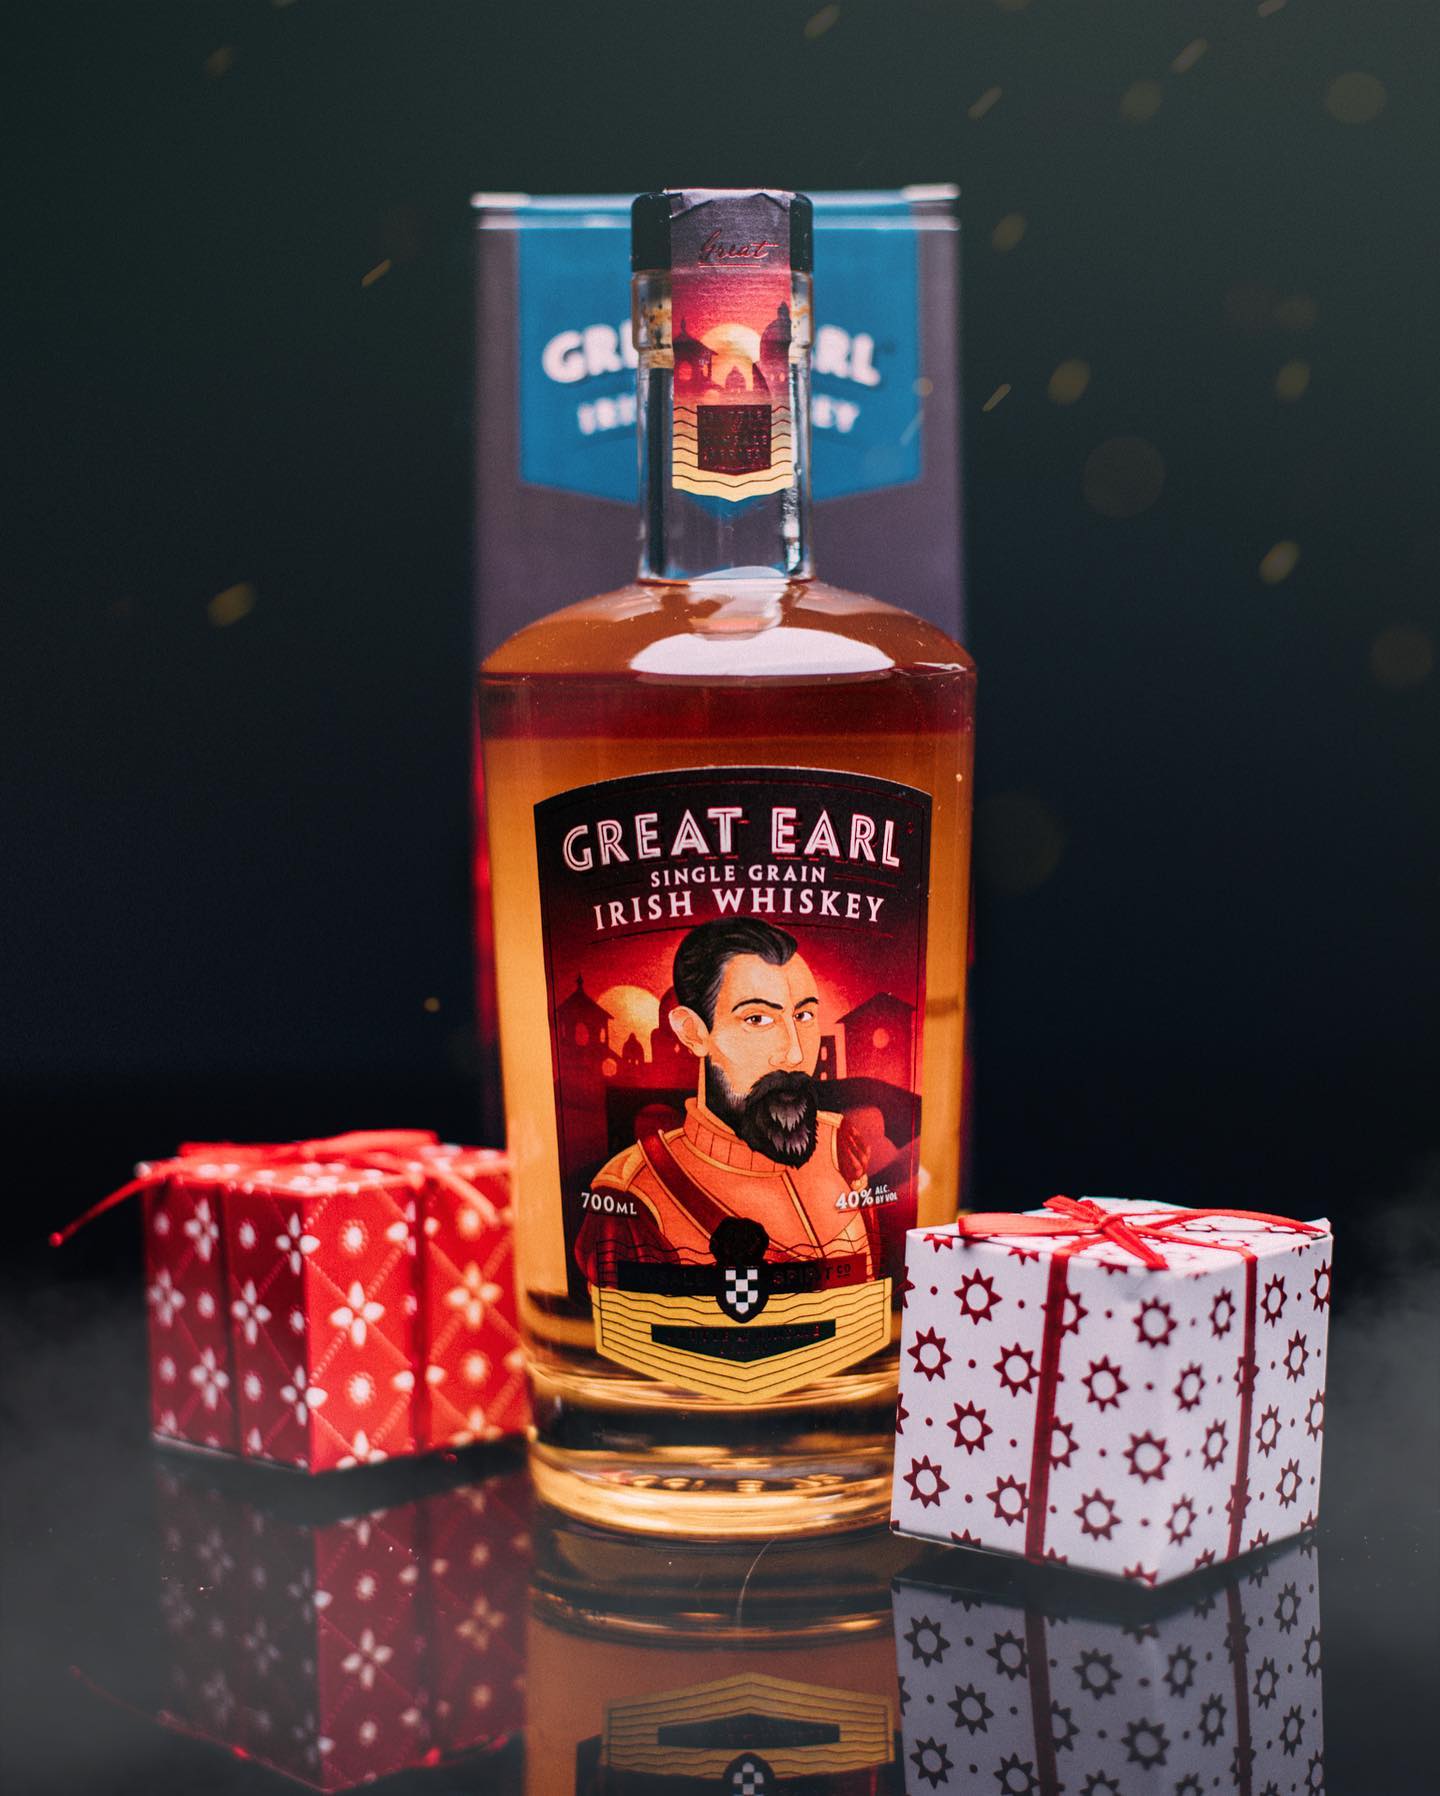 🎁🥃 Great Earl Single Grain Irish Whiskey, triple-casked, defiantly Irish, unflinching like its namesake.

NOSE: 
Subtle hints of cherry, strawberry, rose petal and citrus, layered on top of marzipan, almond and oak notes. Vibrant fruity notes on both the nose and palate.

COLOUR: 
The Rioja wine cask imparts a colour reminiscent of a fine Rose wine.

TASTE: 
It delivers satisfying blends of toffee, vanilla and toasted almonds. These are complemented by delightful notes of cinnamon and clove, typical of spicy riojas.

FINISH: 
This whiskey has a medium bodied mouthfeel that ends in a long, warm and moreish finish. Decent length, with a strong finish. 

Now Available to purchase in selected Off Licences, @supervalu_irl & @centra_irl stores nationwide. 

To learn more & shop now: https://kinsalespirit.com/product/great-earl/

#drinkresponsibly #greatearlwhiskey #irishwhiskey #whiskey #whisky #singlegrain #greatearl #irish #ireland #dram